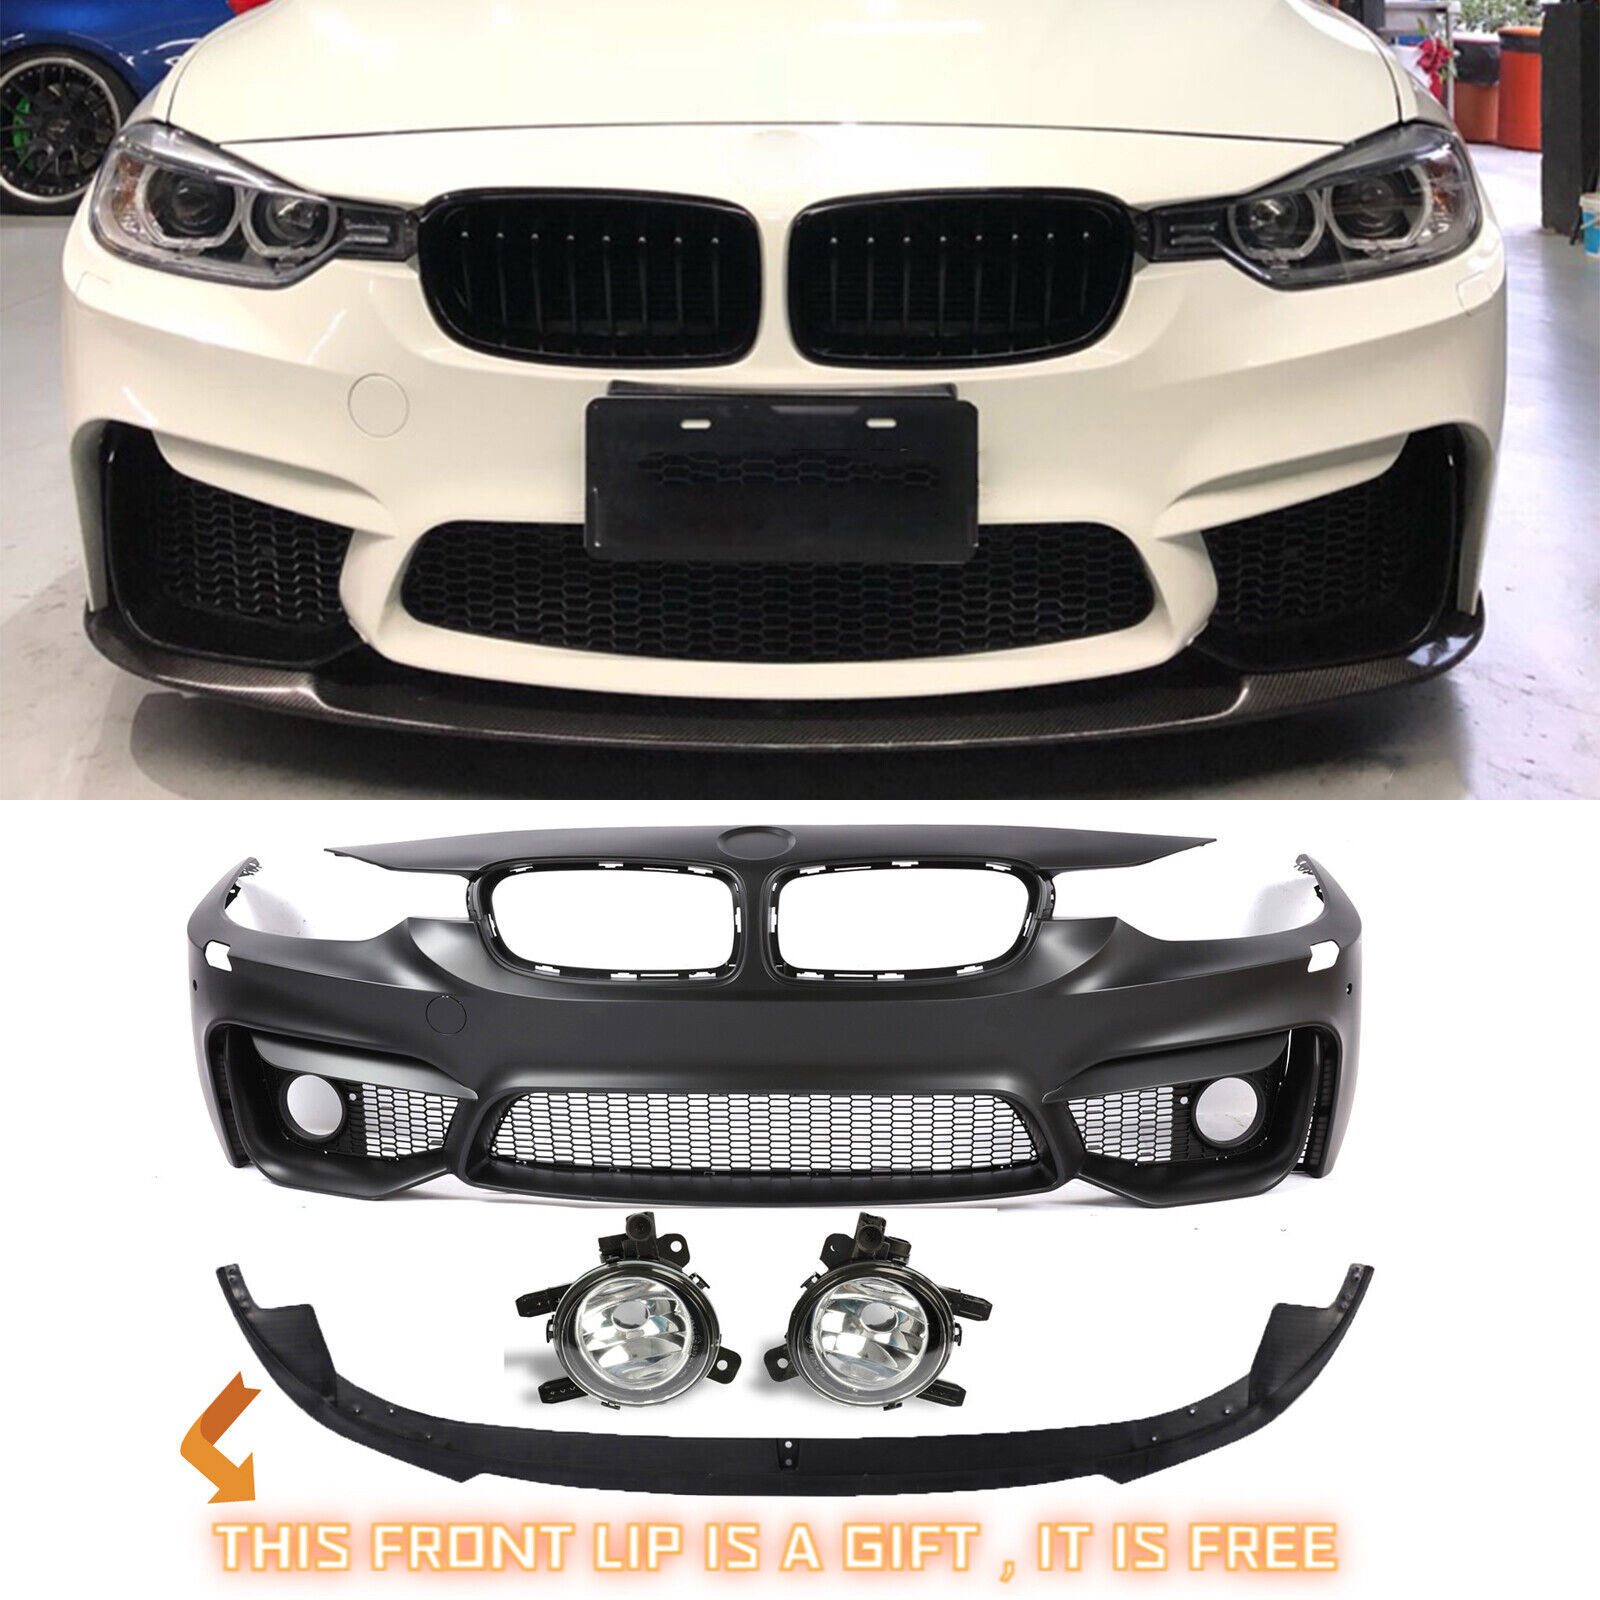 Front Bumper F80 M3 Style W/O PDC+ Fog Lights + lip For BMW F30 3-Series 12-18